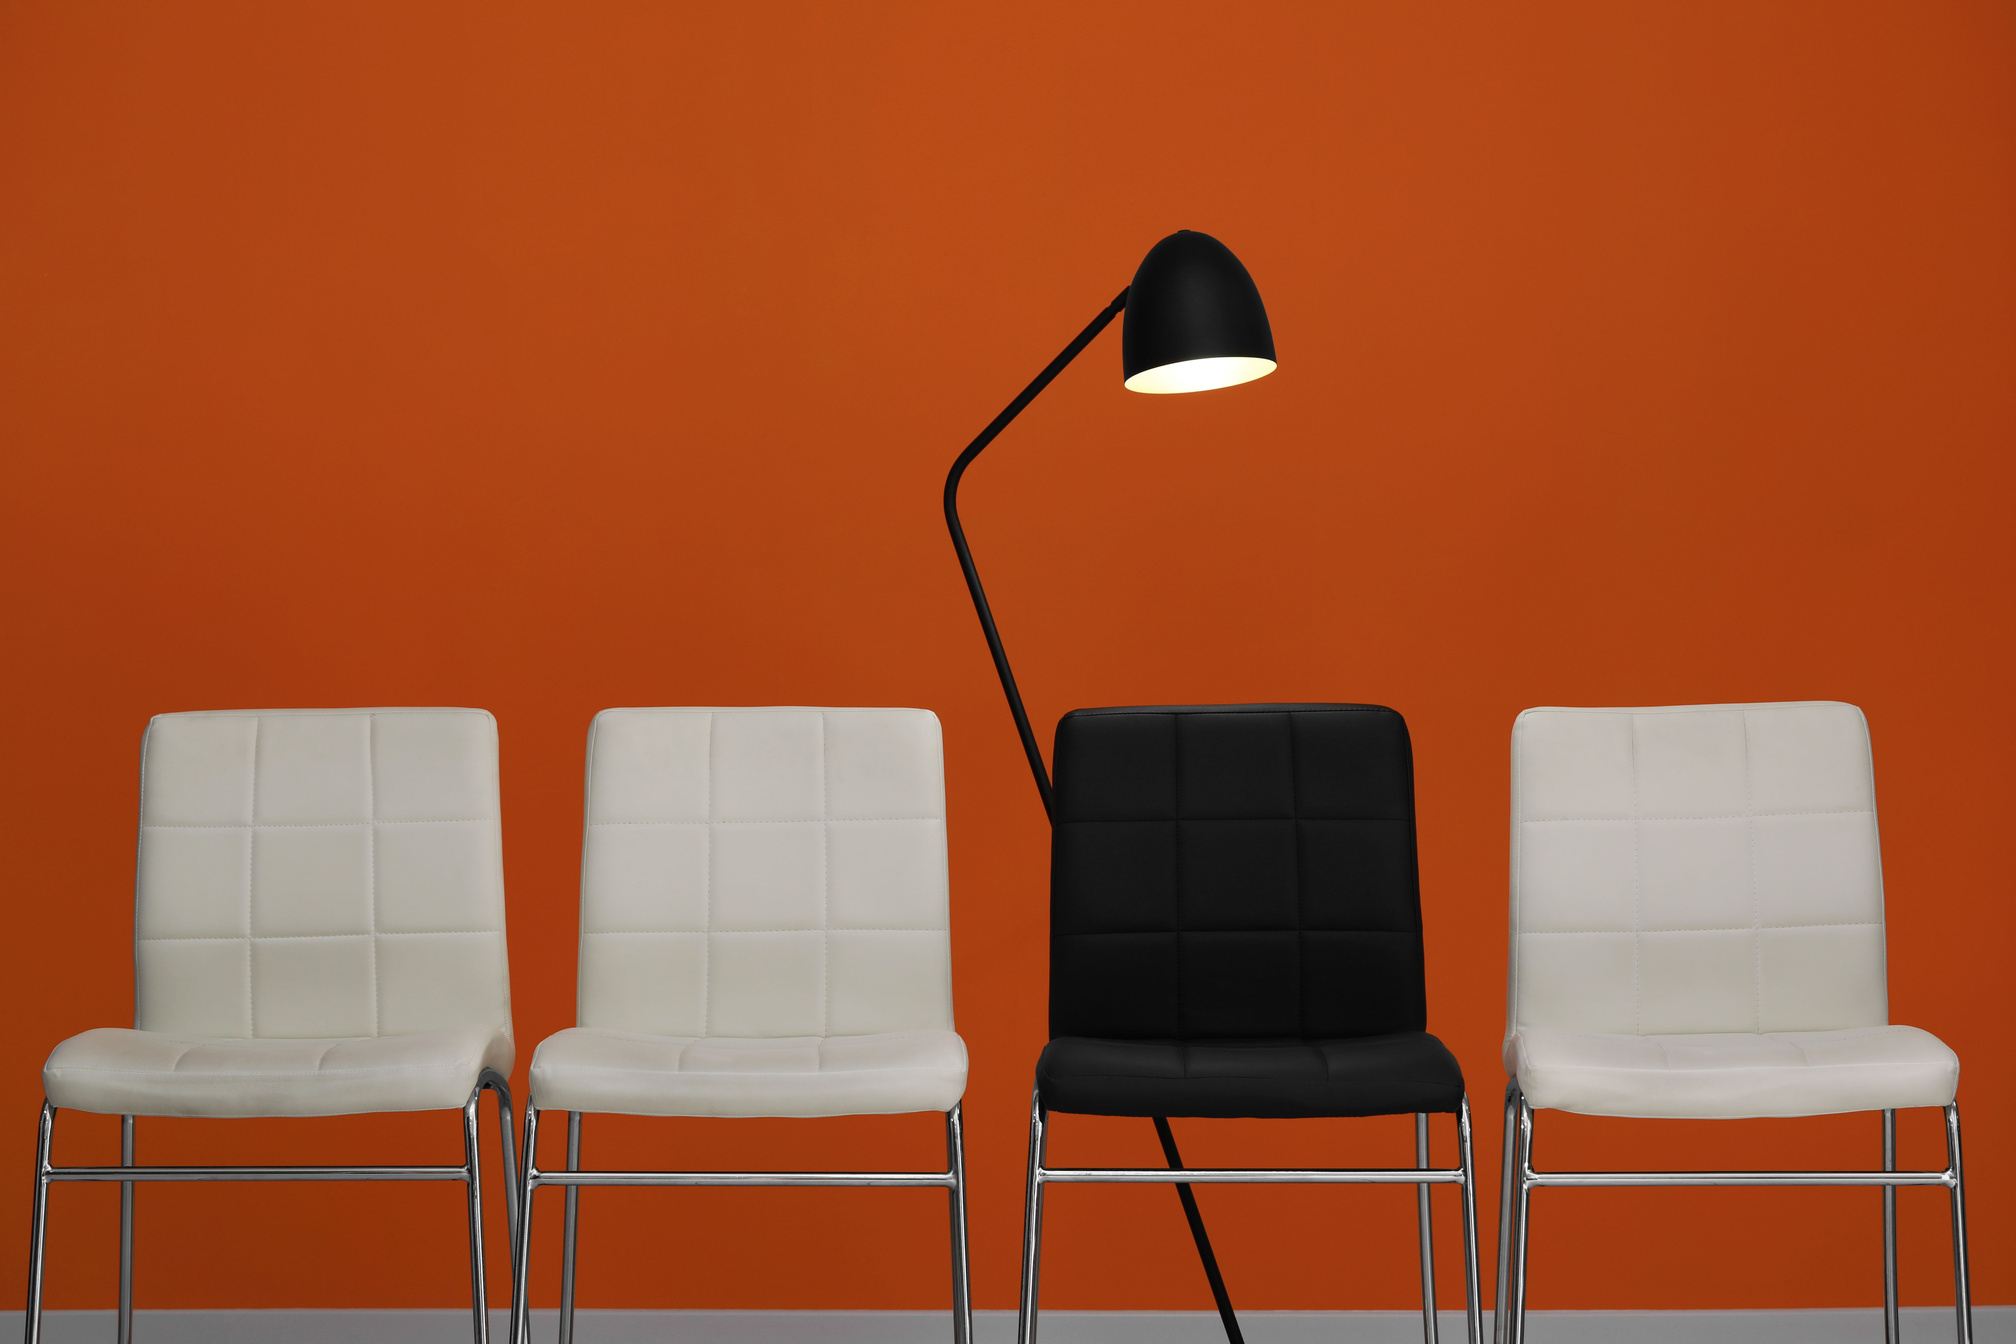 White Chairs with Black One and Lamp near Orange Wall. Recruiter